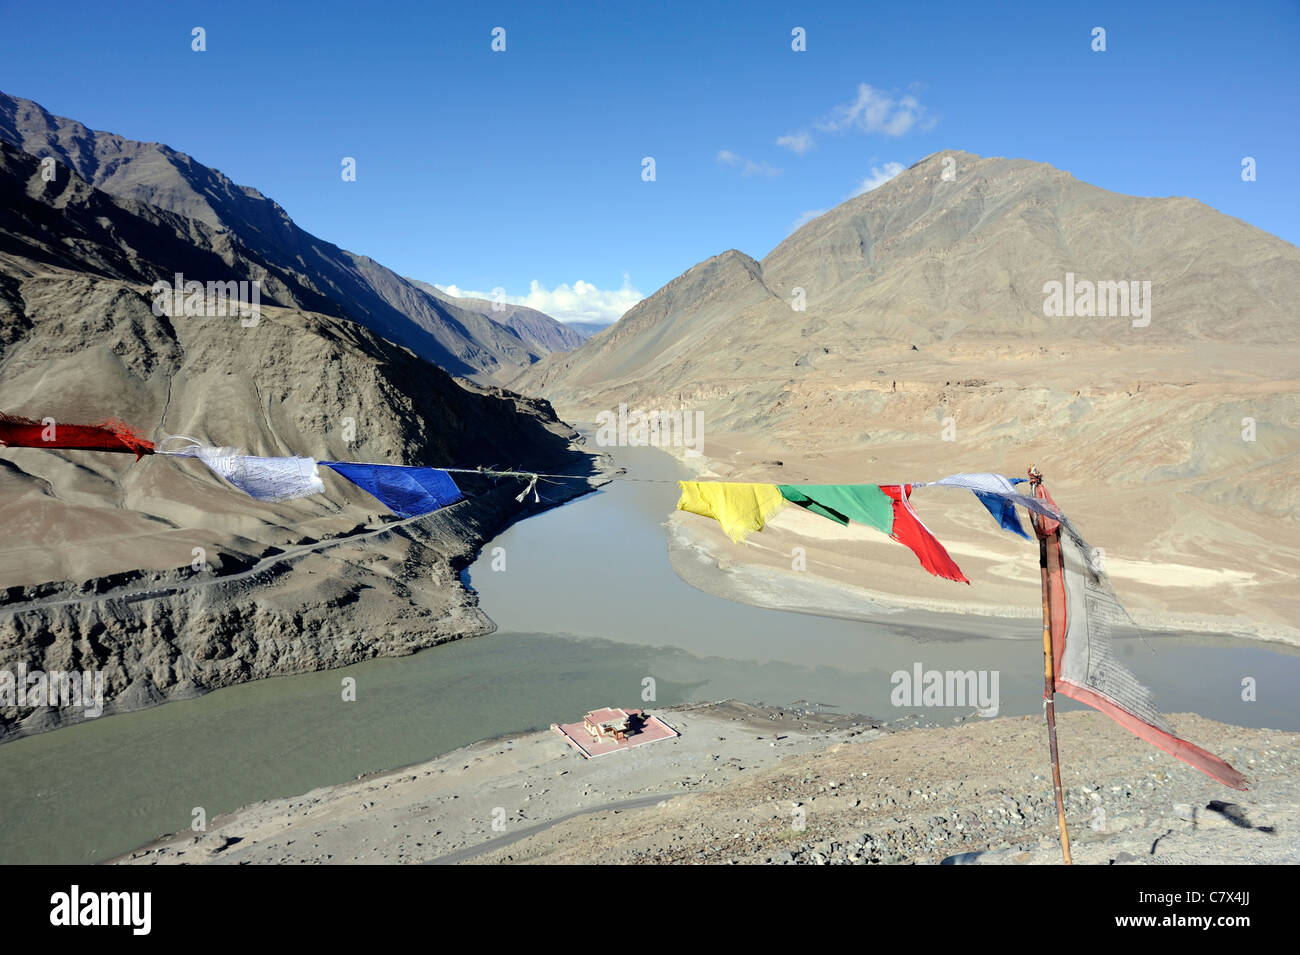 Prayer flags mark the confluence of the Zanskar River and the Indus near Nimu. The Indus comes in from the left. Stock Photo